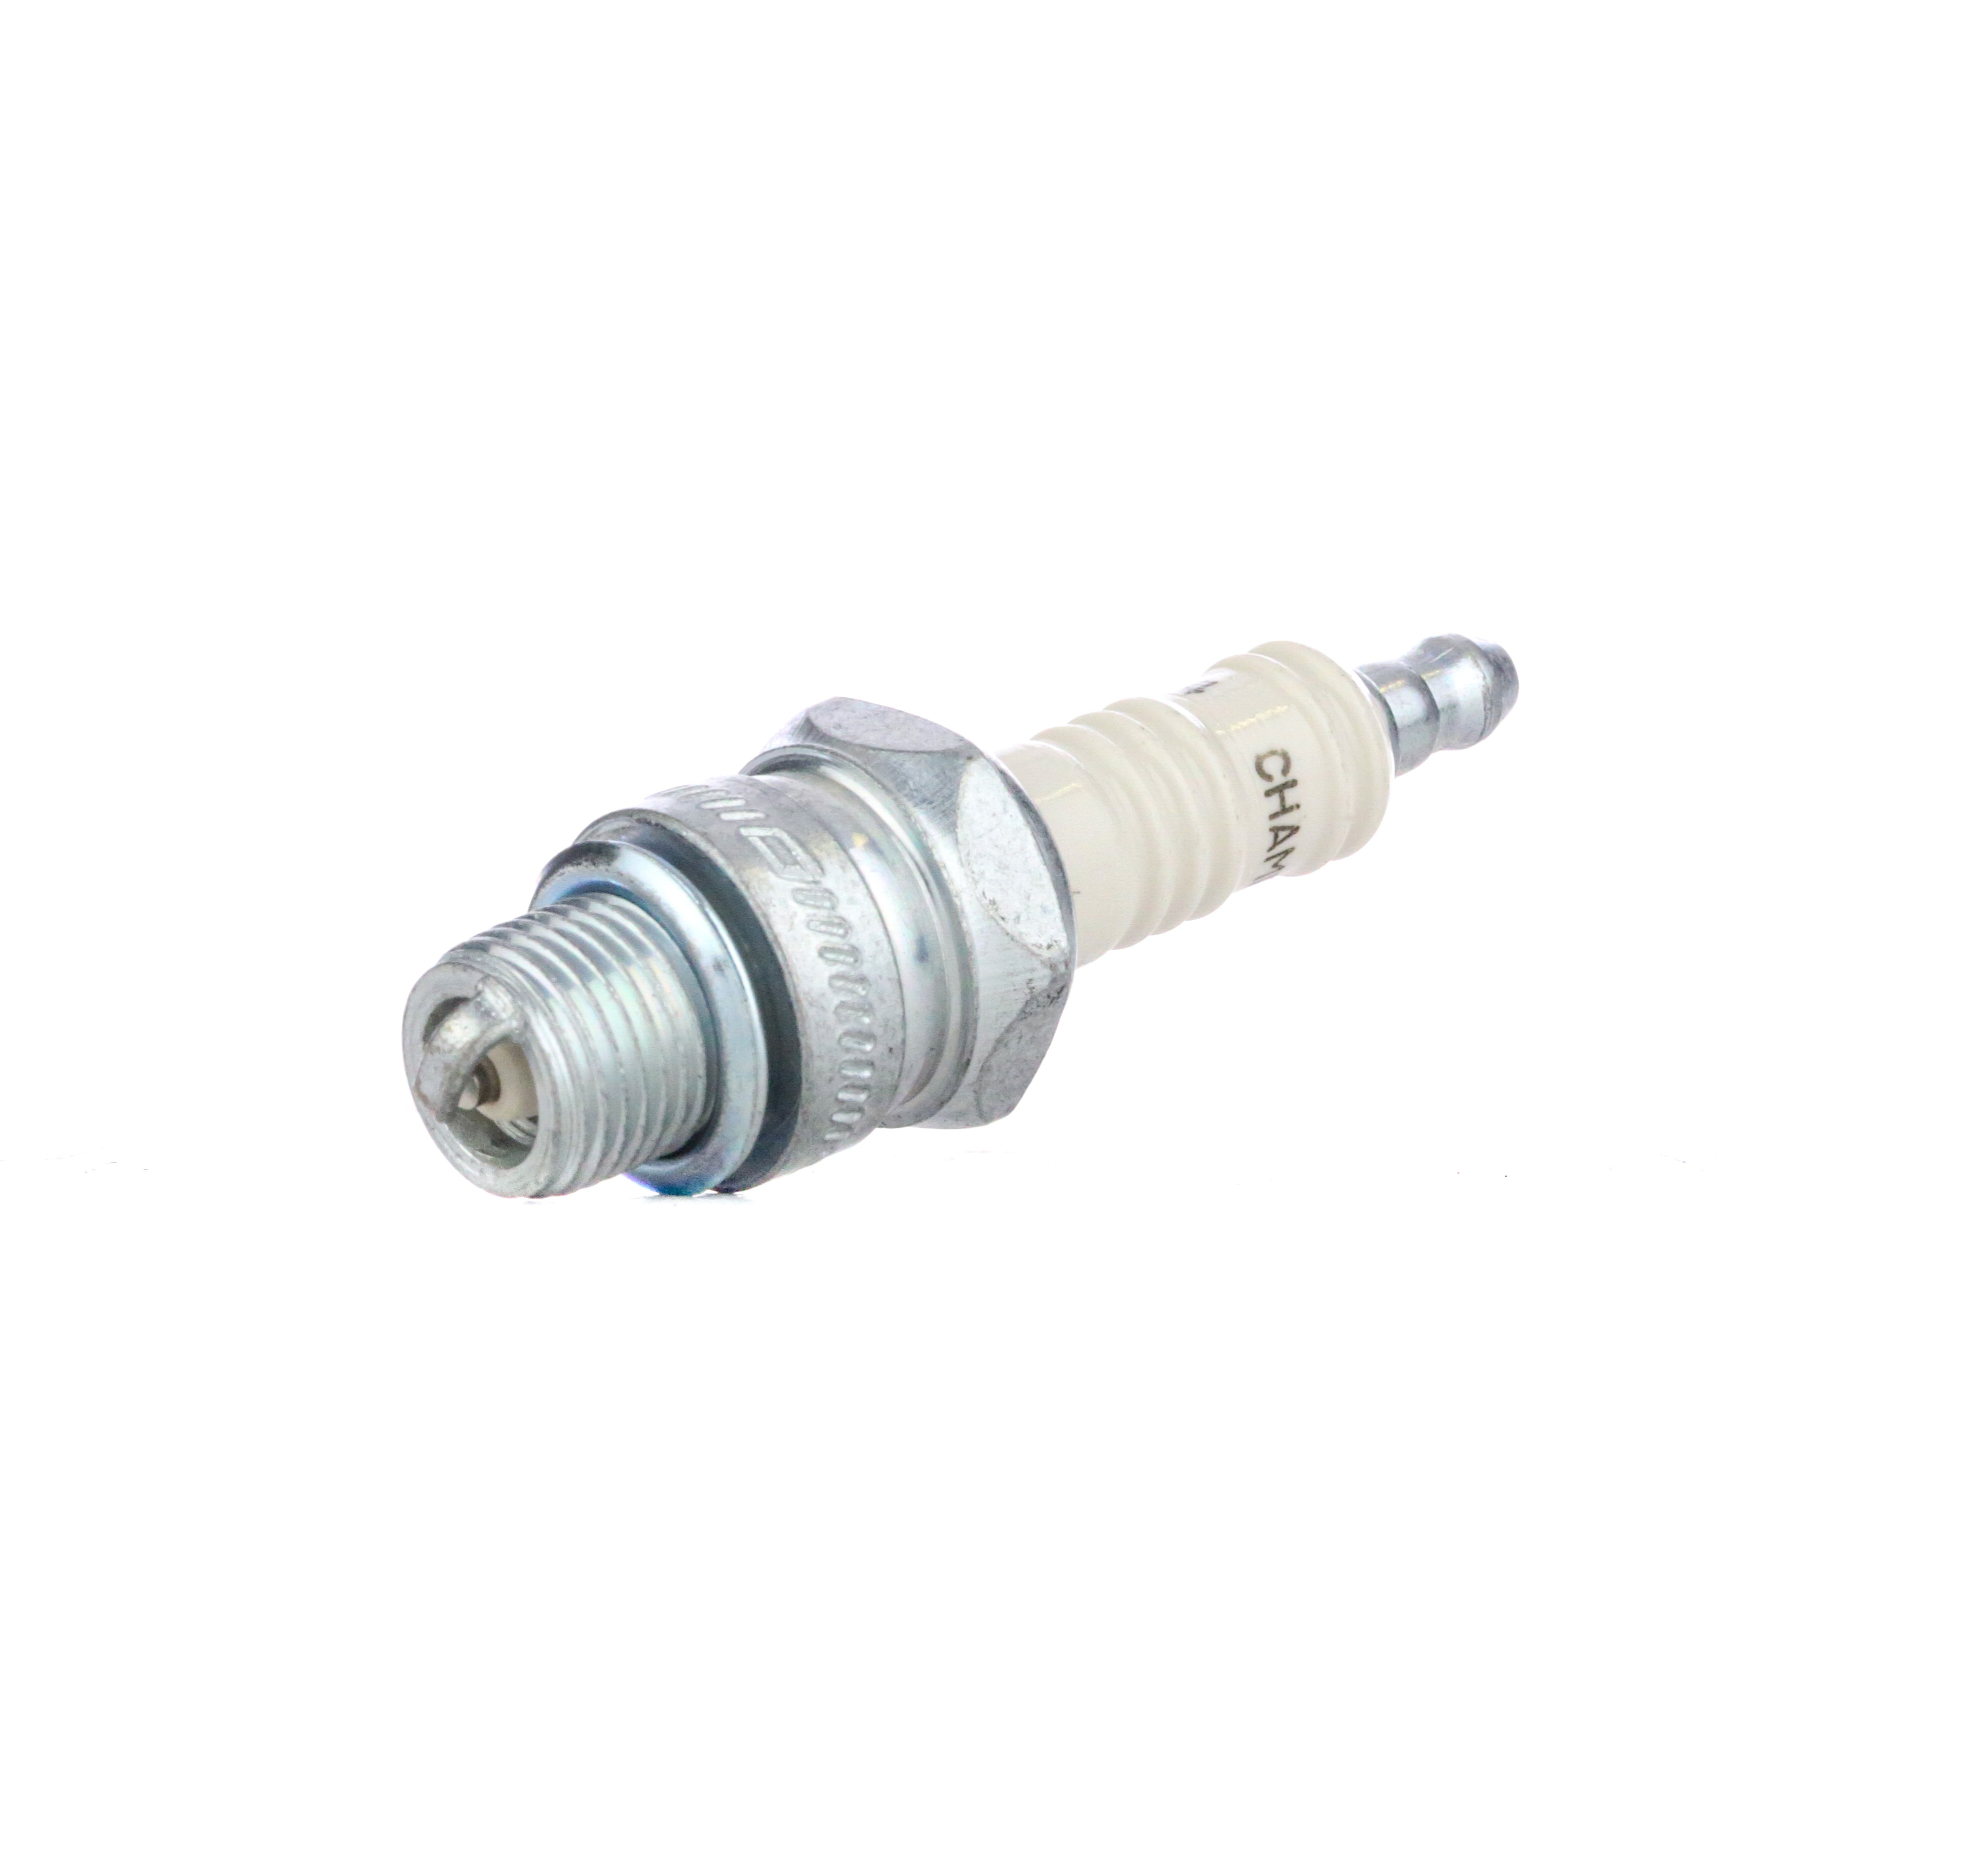 CHAMPION L77JC4/T10 Spark plug cheap in online store